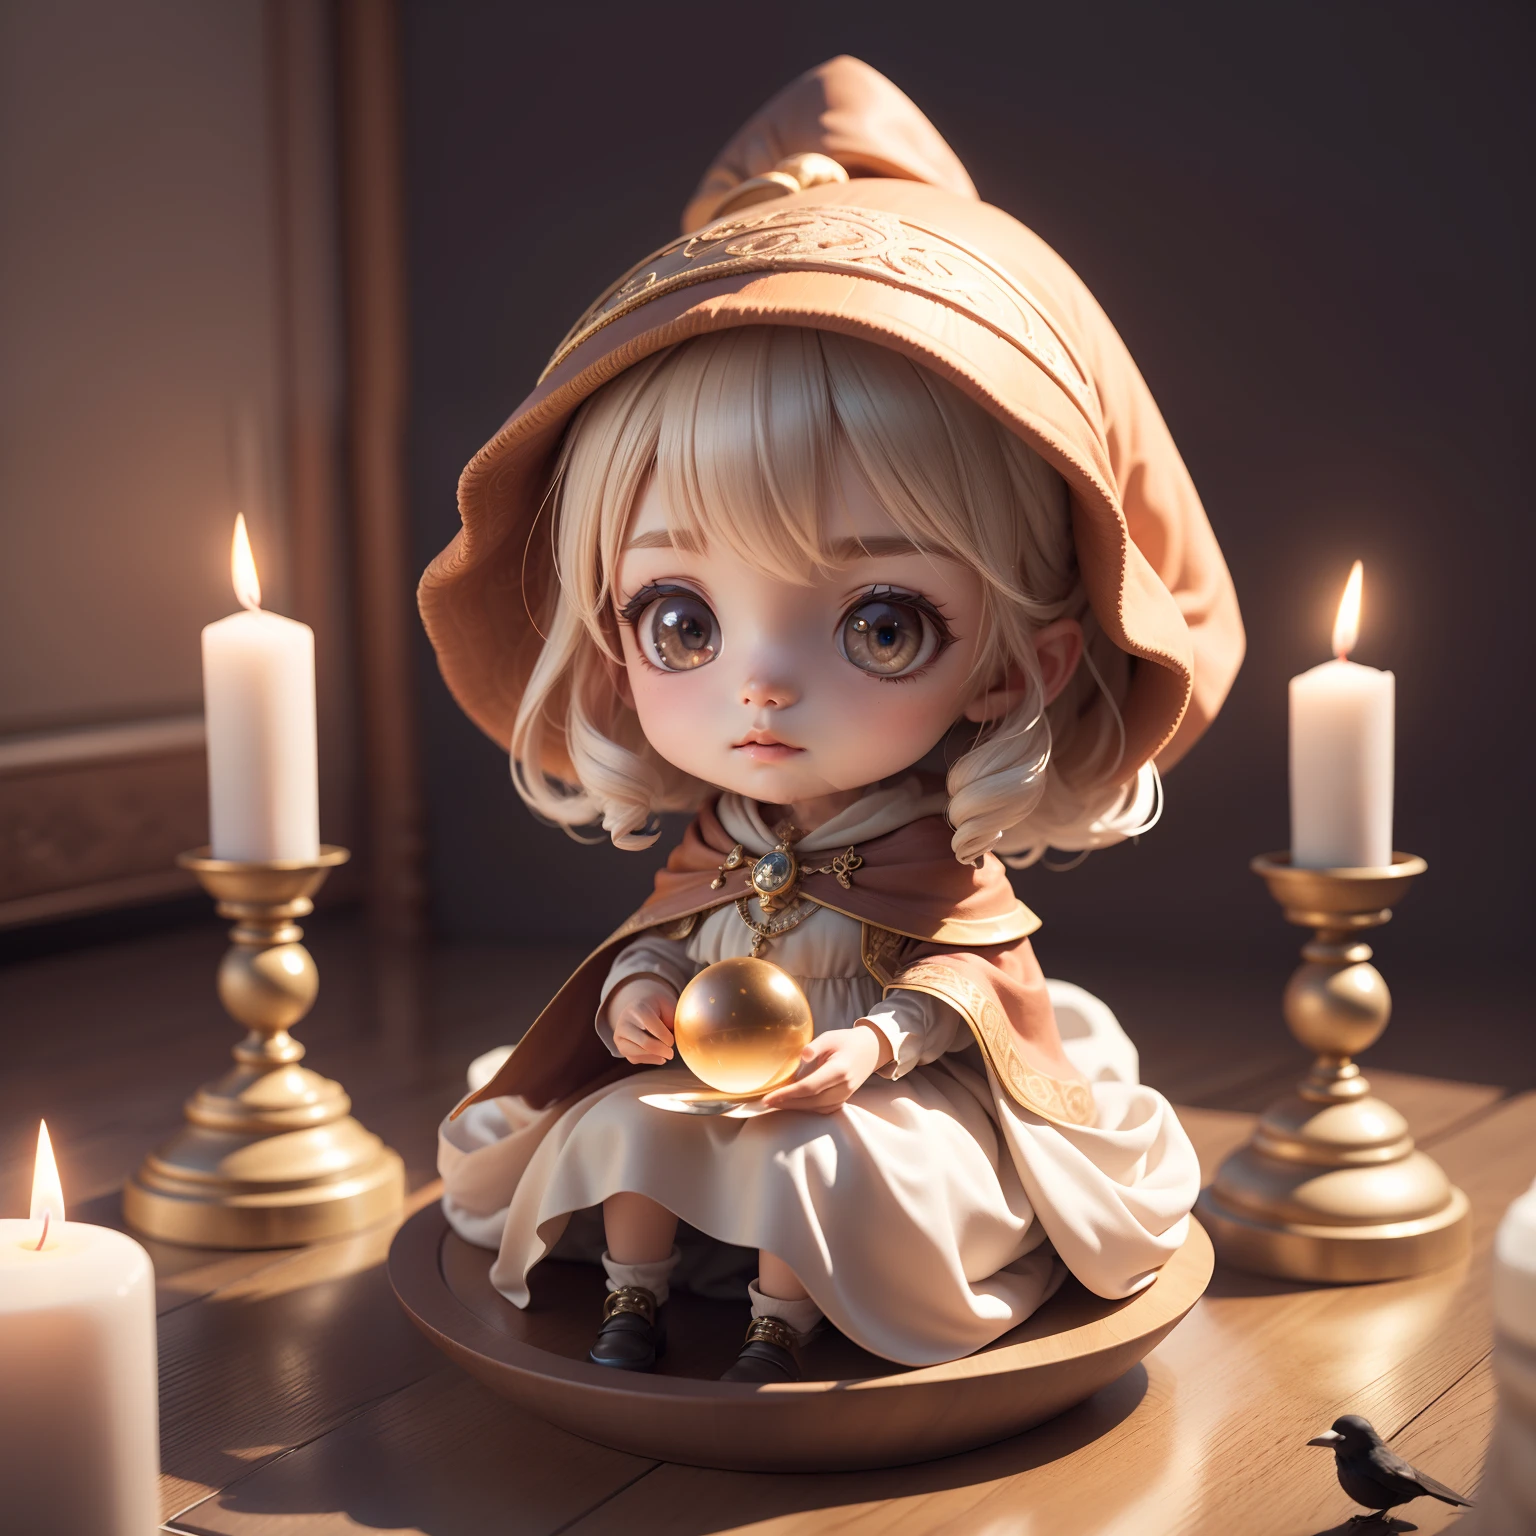 Cute Baby Chibi Anime、(((chibi 3d))) (Best Quality), (masutepiece)、Old witch sitting on Kadilau's chair in the background ，She was holding Soniste's crow。 On the table in front of her is、The crystal ball was clear， There is a mysterious fantasy world in the crystal ball，Several candles were lit next to it ，A sideways glance at the camera，Be thoughtful，Pack in sheets，hermit，Marble statue of，Deep octane rendering,Candlelight lighting、barroco、Europeatomically correct，super detailed